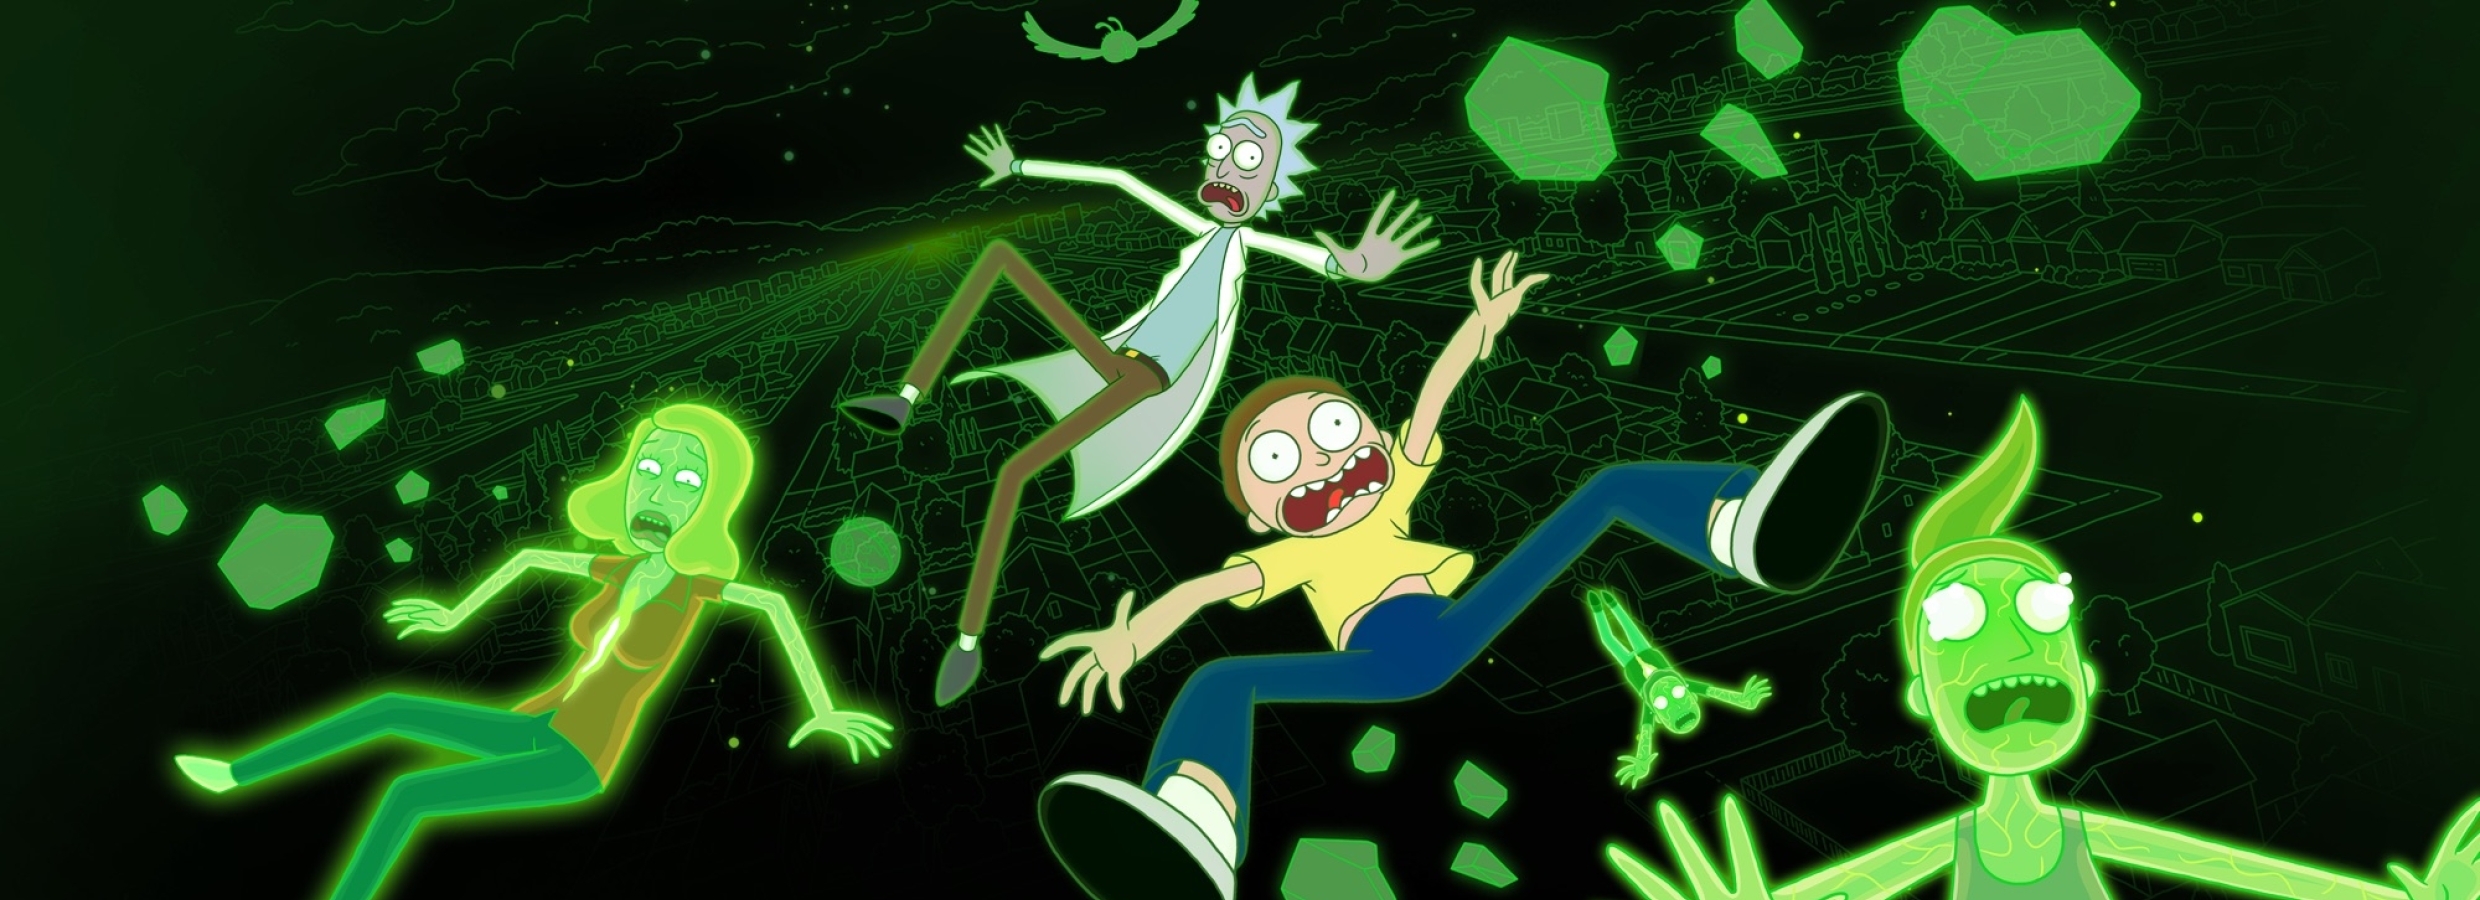 2480x900 Rick and Morty into The Space HD 2480x900 Resolution Wallpaper ...